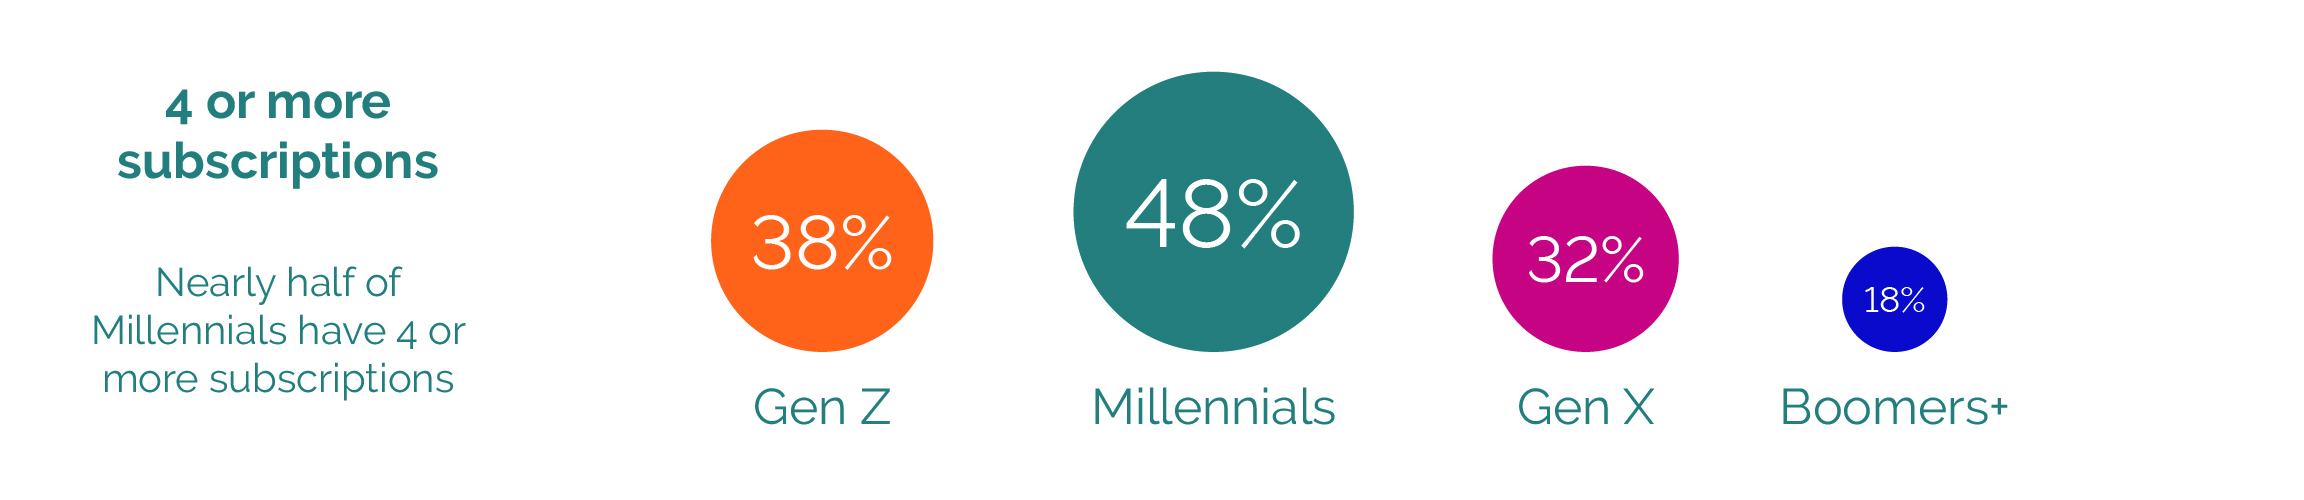 Half of millennials have 4 or more subscriptions